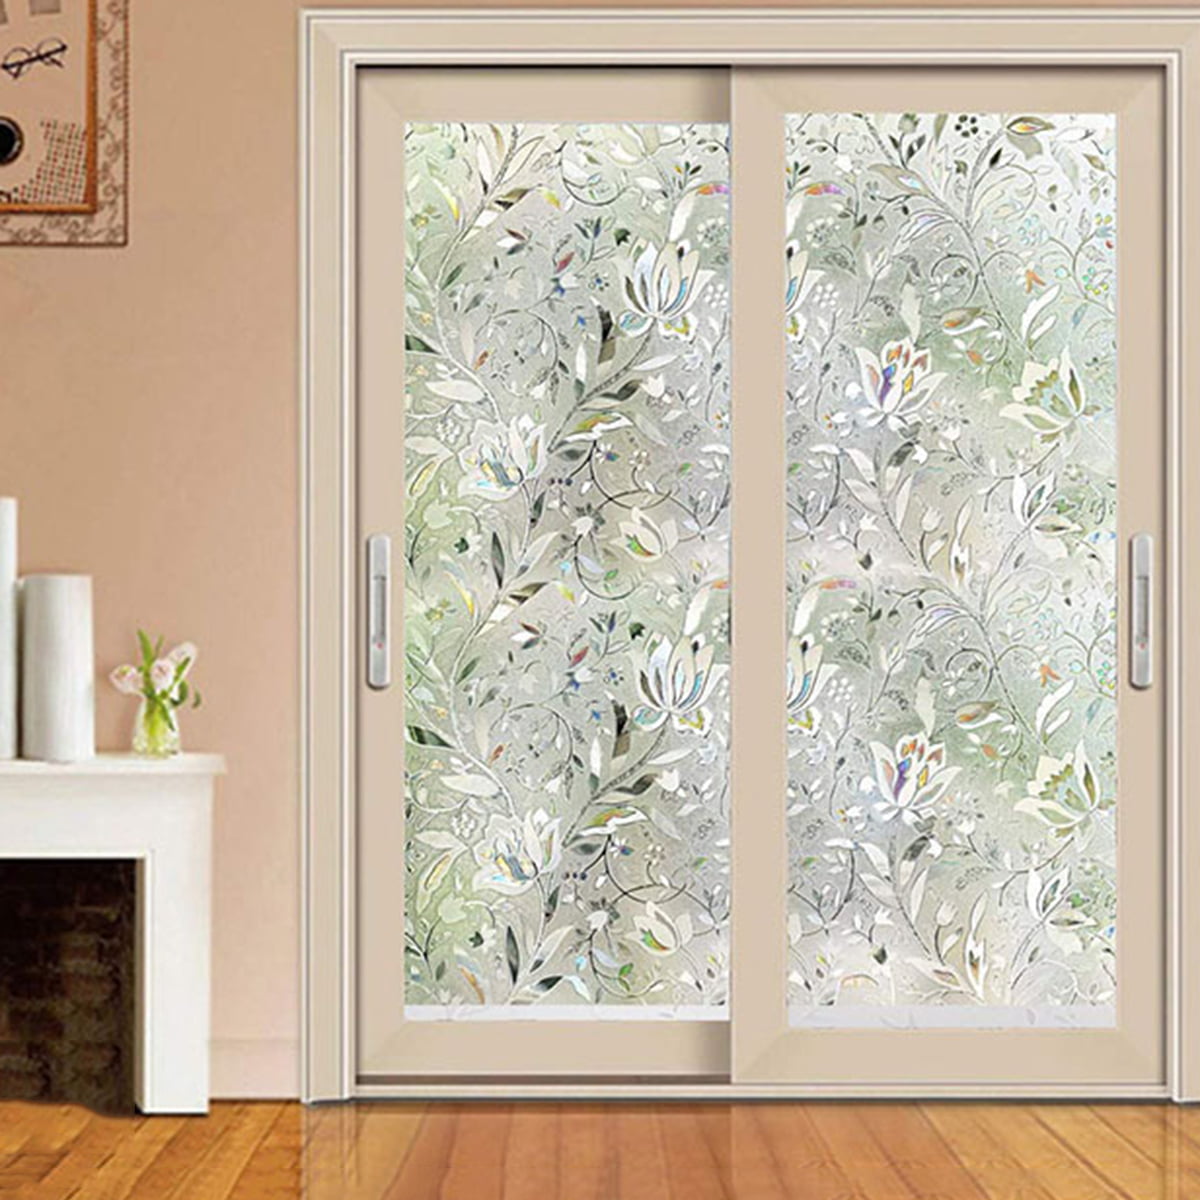 90cm Width Bathroom Office Privacy Frosted Frosting Removable Window Glass Film 